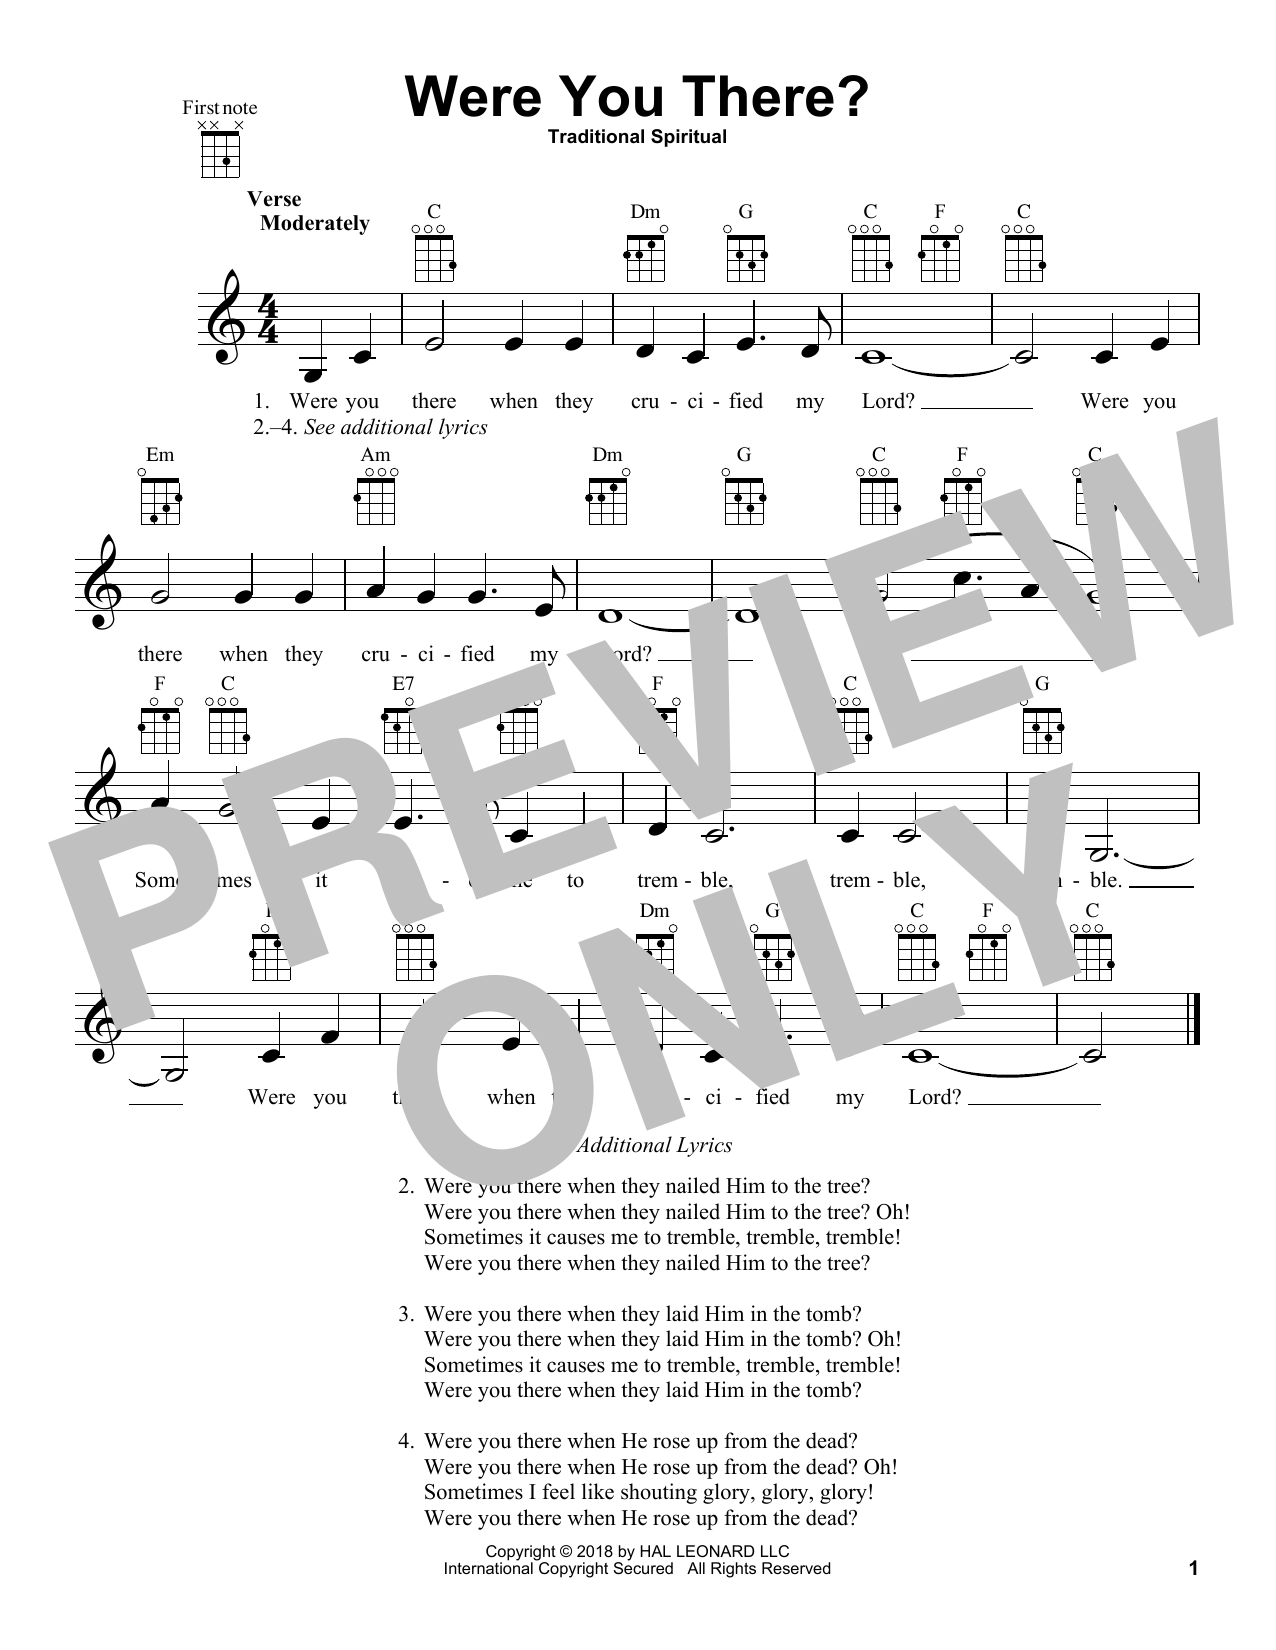 Download Traditional Spiritual Were You There? Sheet Music